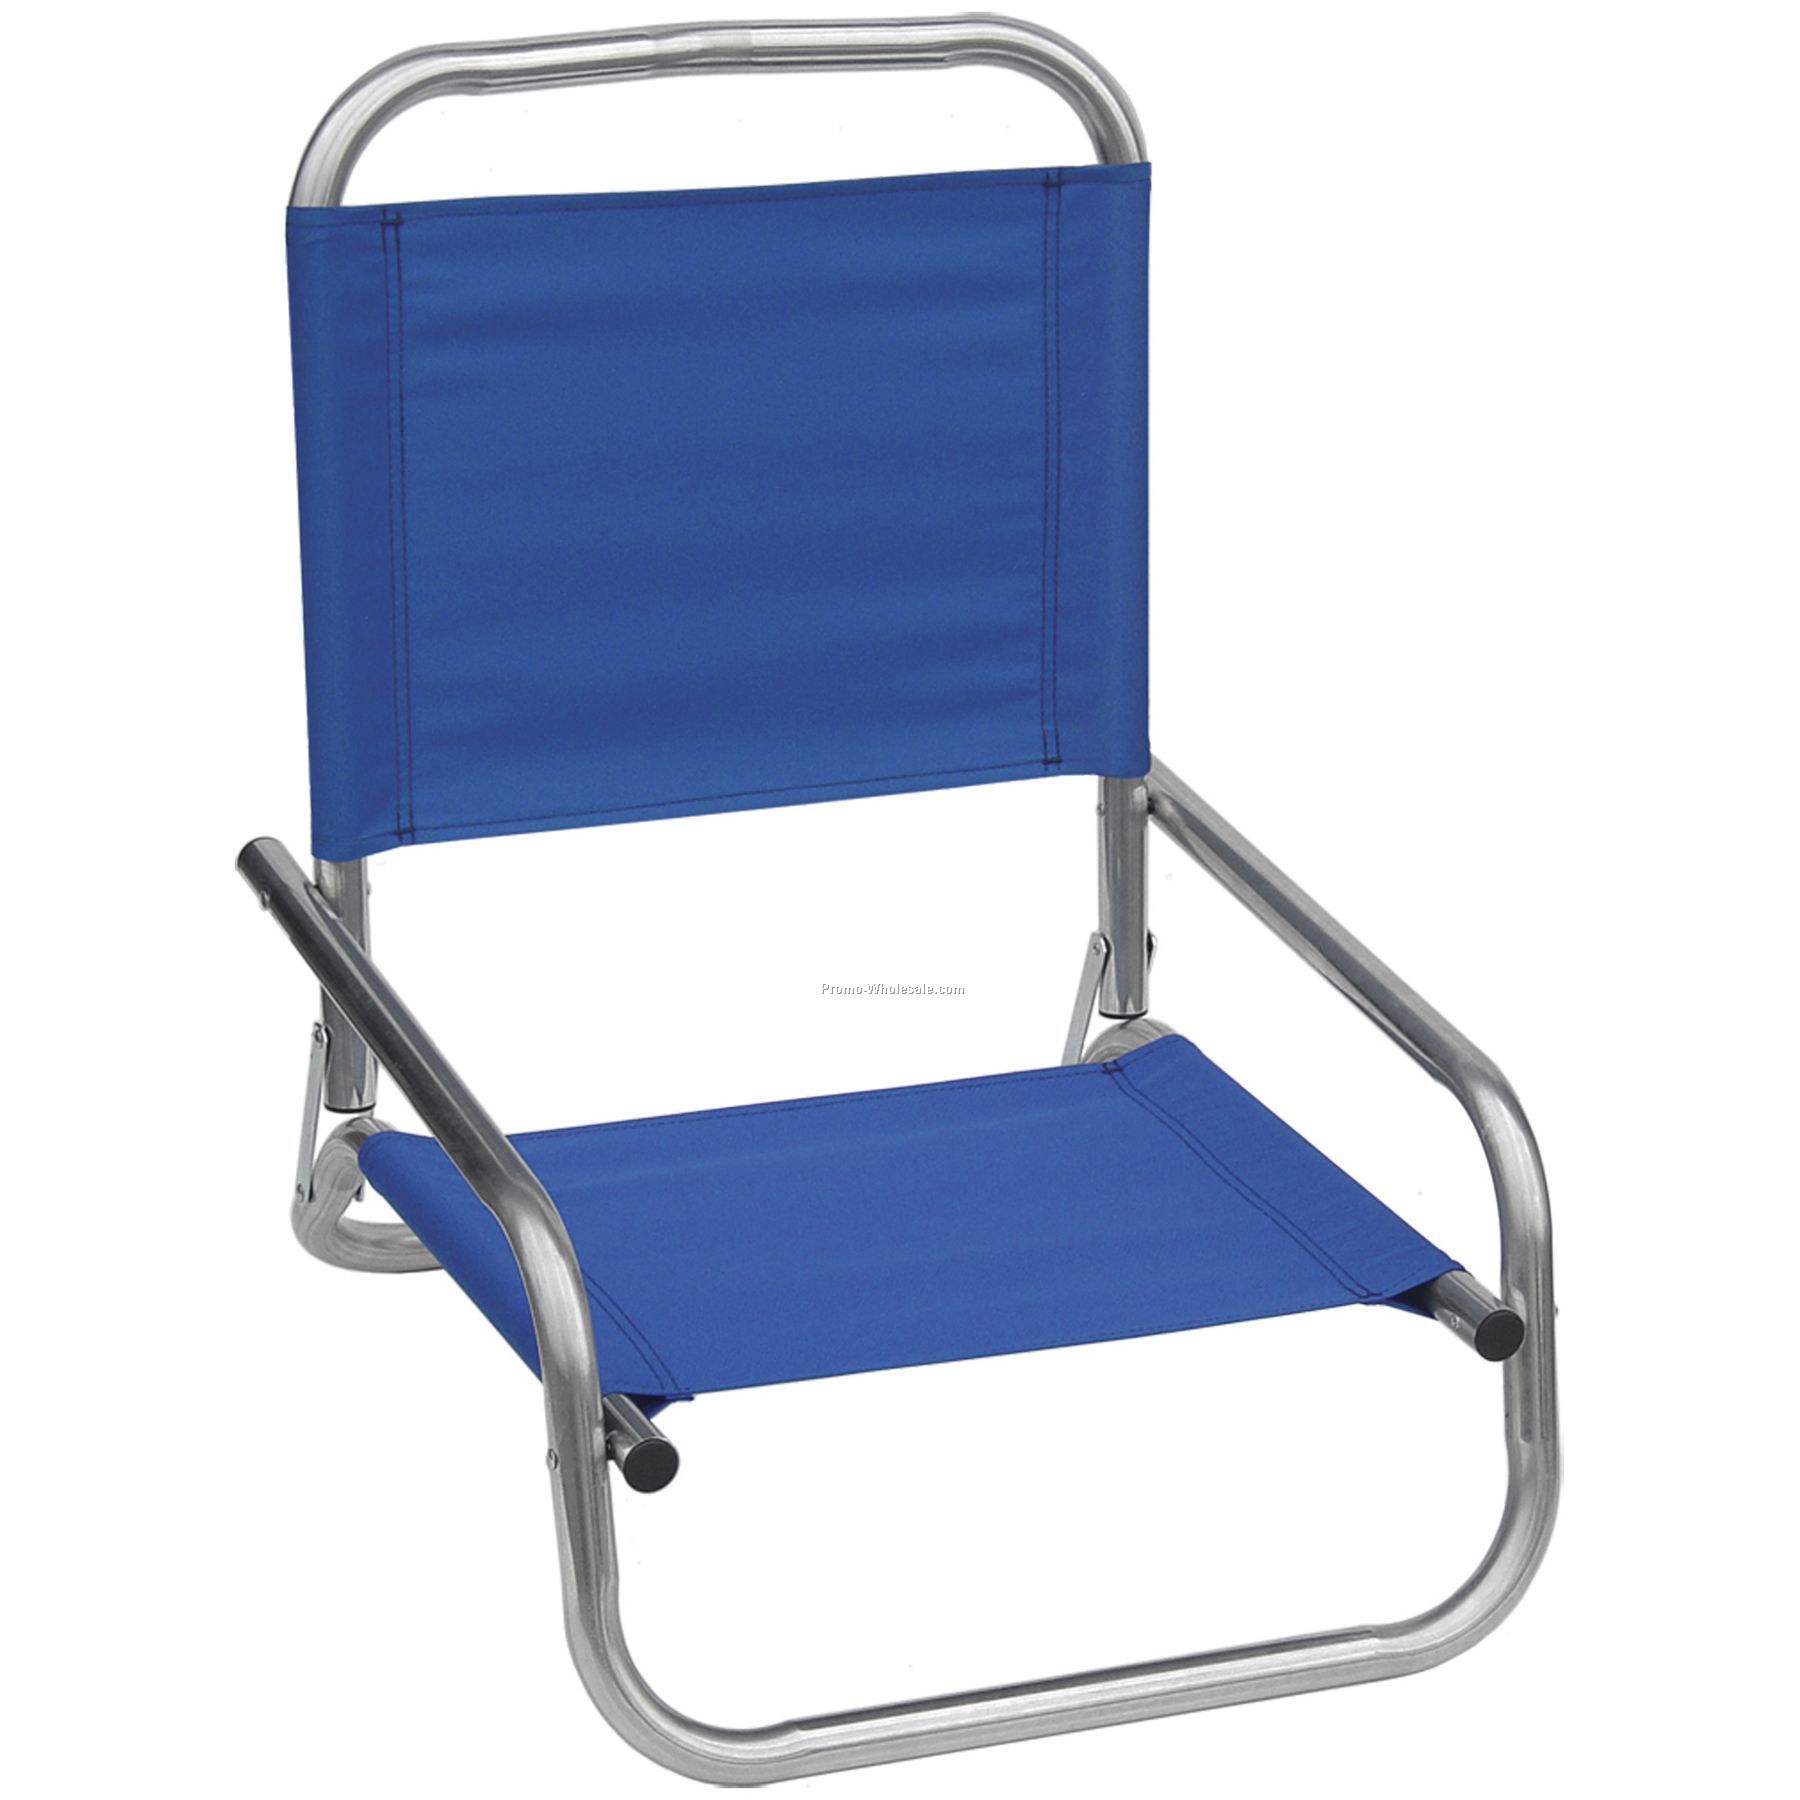 Standard High Back Beach Chair (Full Color Digital Or 1 Color)